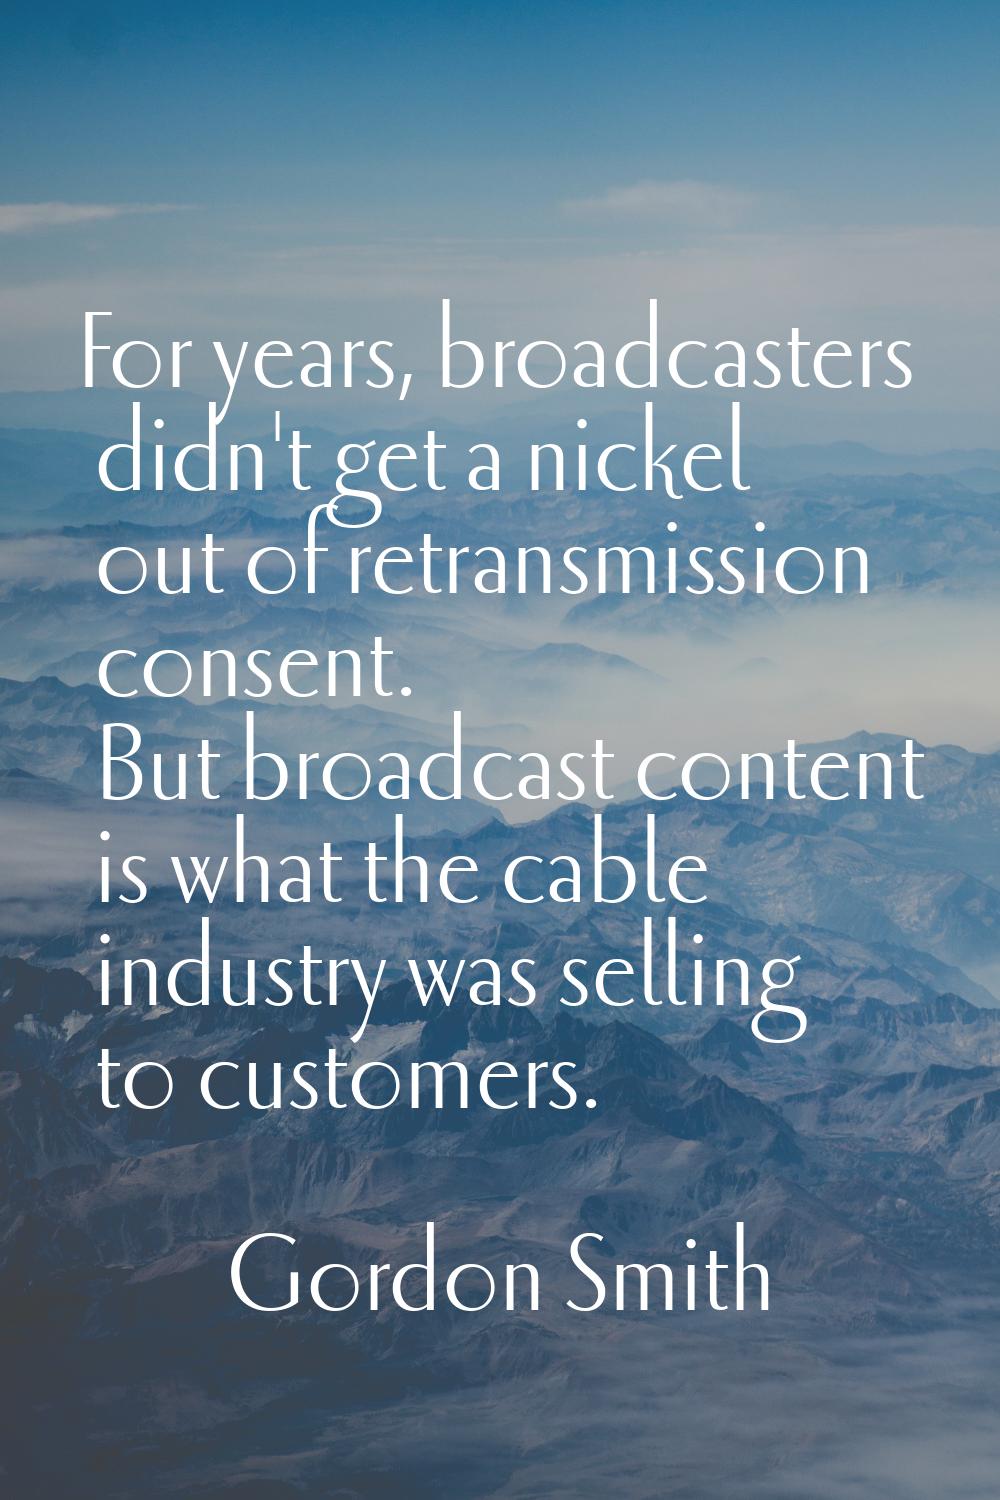 For years, broadcasters didn't get a nickel out of retransmission consent. But broadcast content is